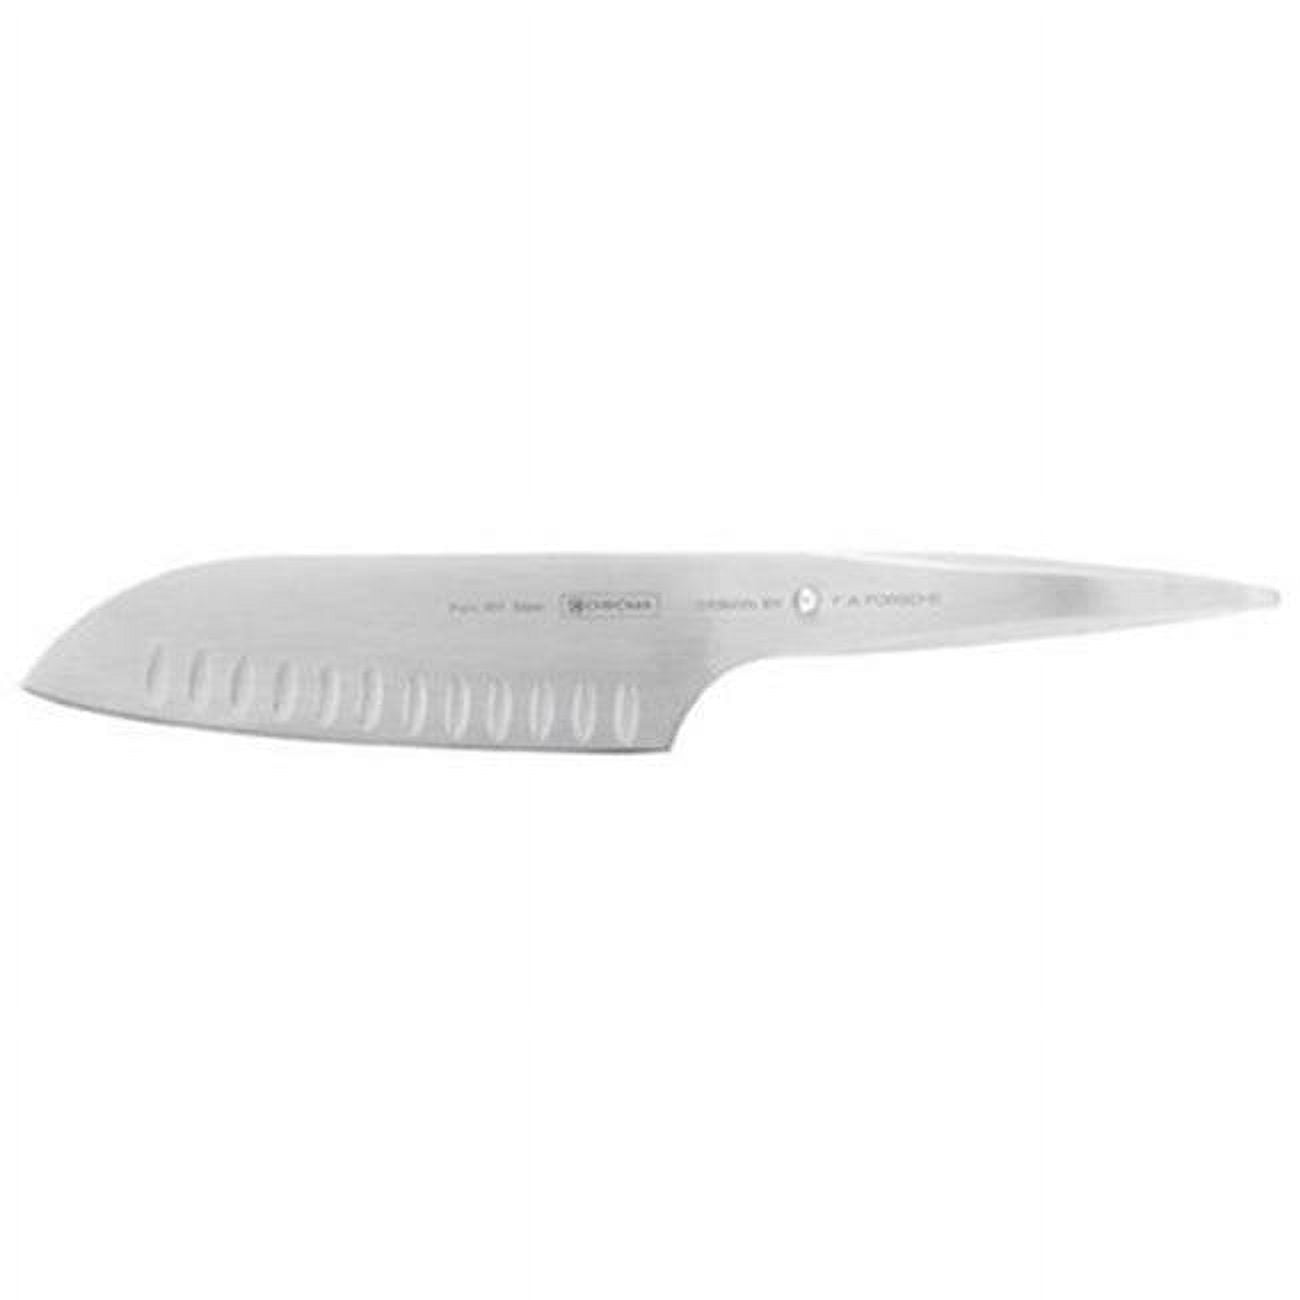 Chroma P21 Type 301 Designed By F.a. Porsche7.25 In. Hollow Groung Santoku Knife